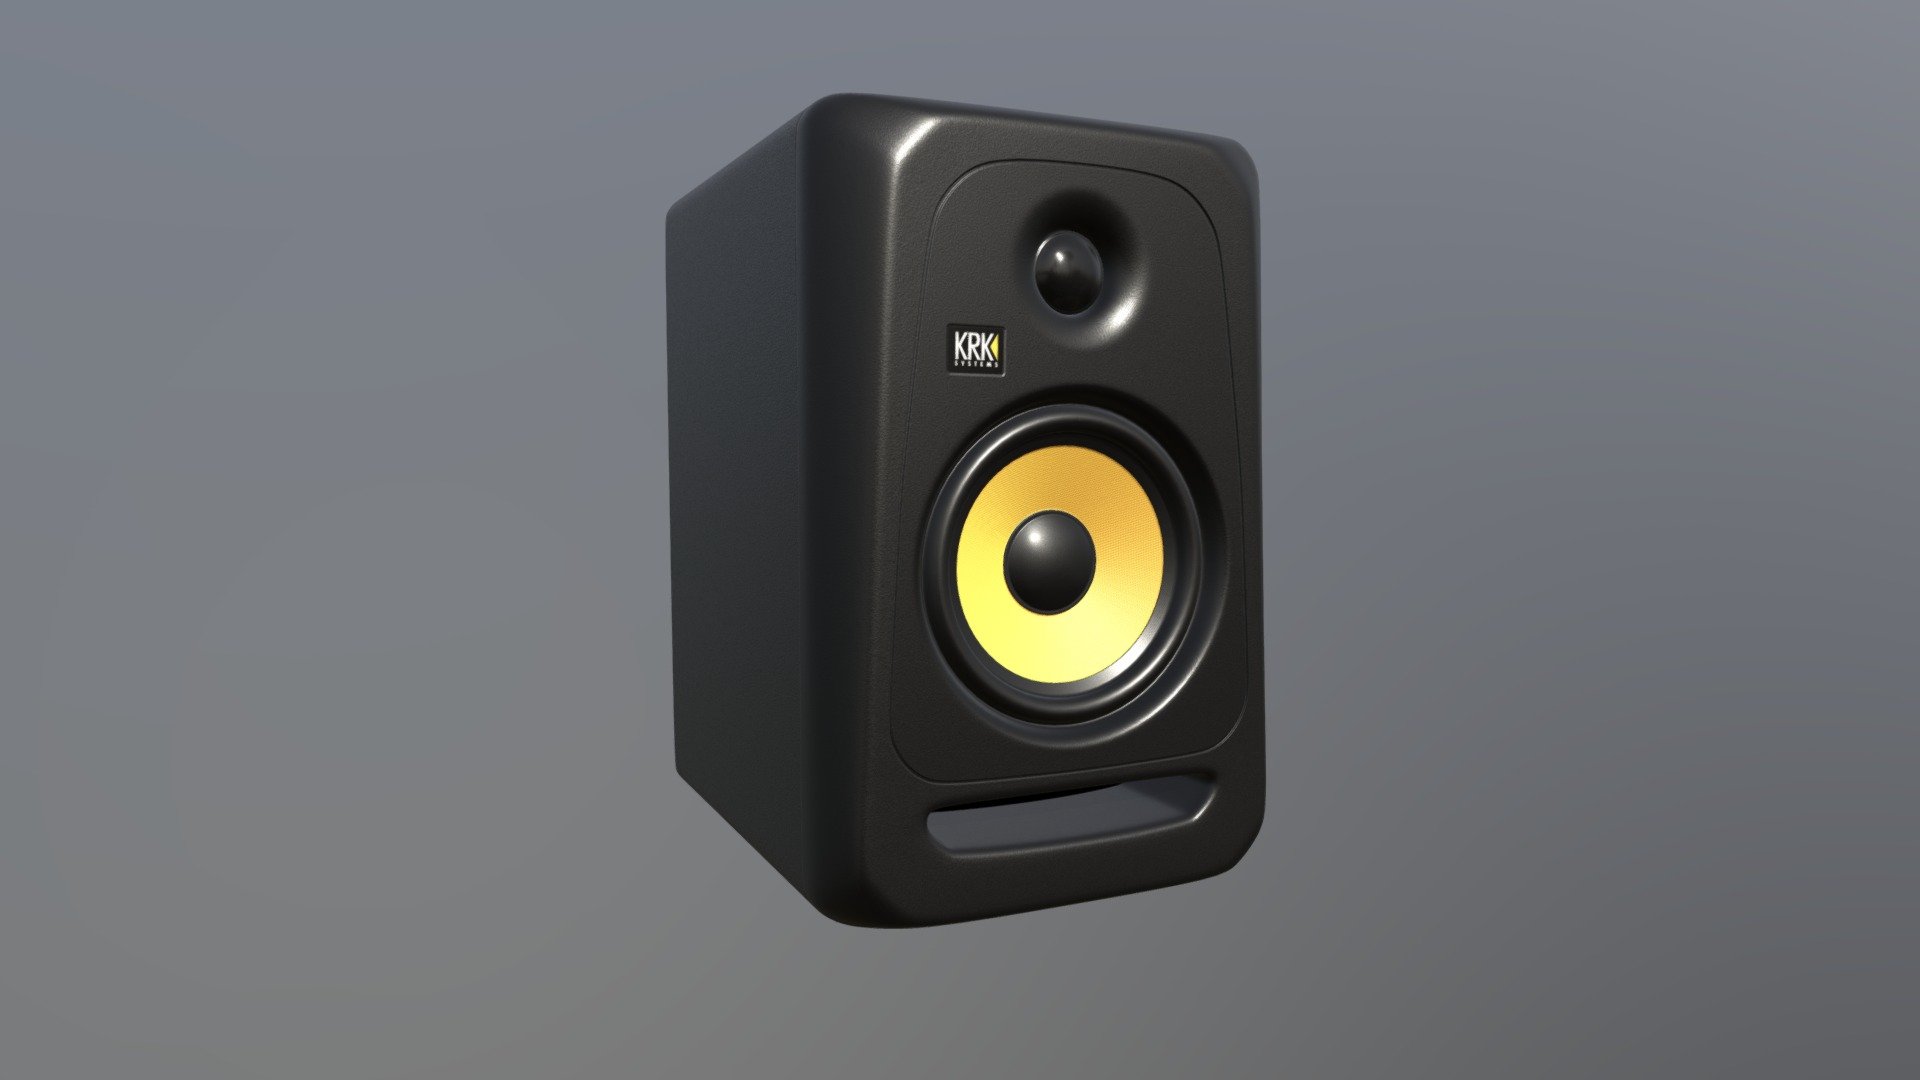 KRK Classic 5 studio monitors.
I created these speakers in Blender, Blueprints weren't available so I used reference images I got from the product website http://www.krksys.com/Classic

This model is downloadable and you are free to use this model as you like but be aware it is a real product owned and copyrighted by KRK Systems, so you will need to do some research before using it on your specific project.

You can download the native Blender file here: https://www.blendswap.com/blend/24177 - KRK Classic 5 Studio Monitor Speaker - Download Free 3D model by TheGiwi 3d model